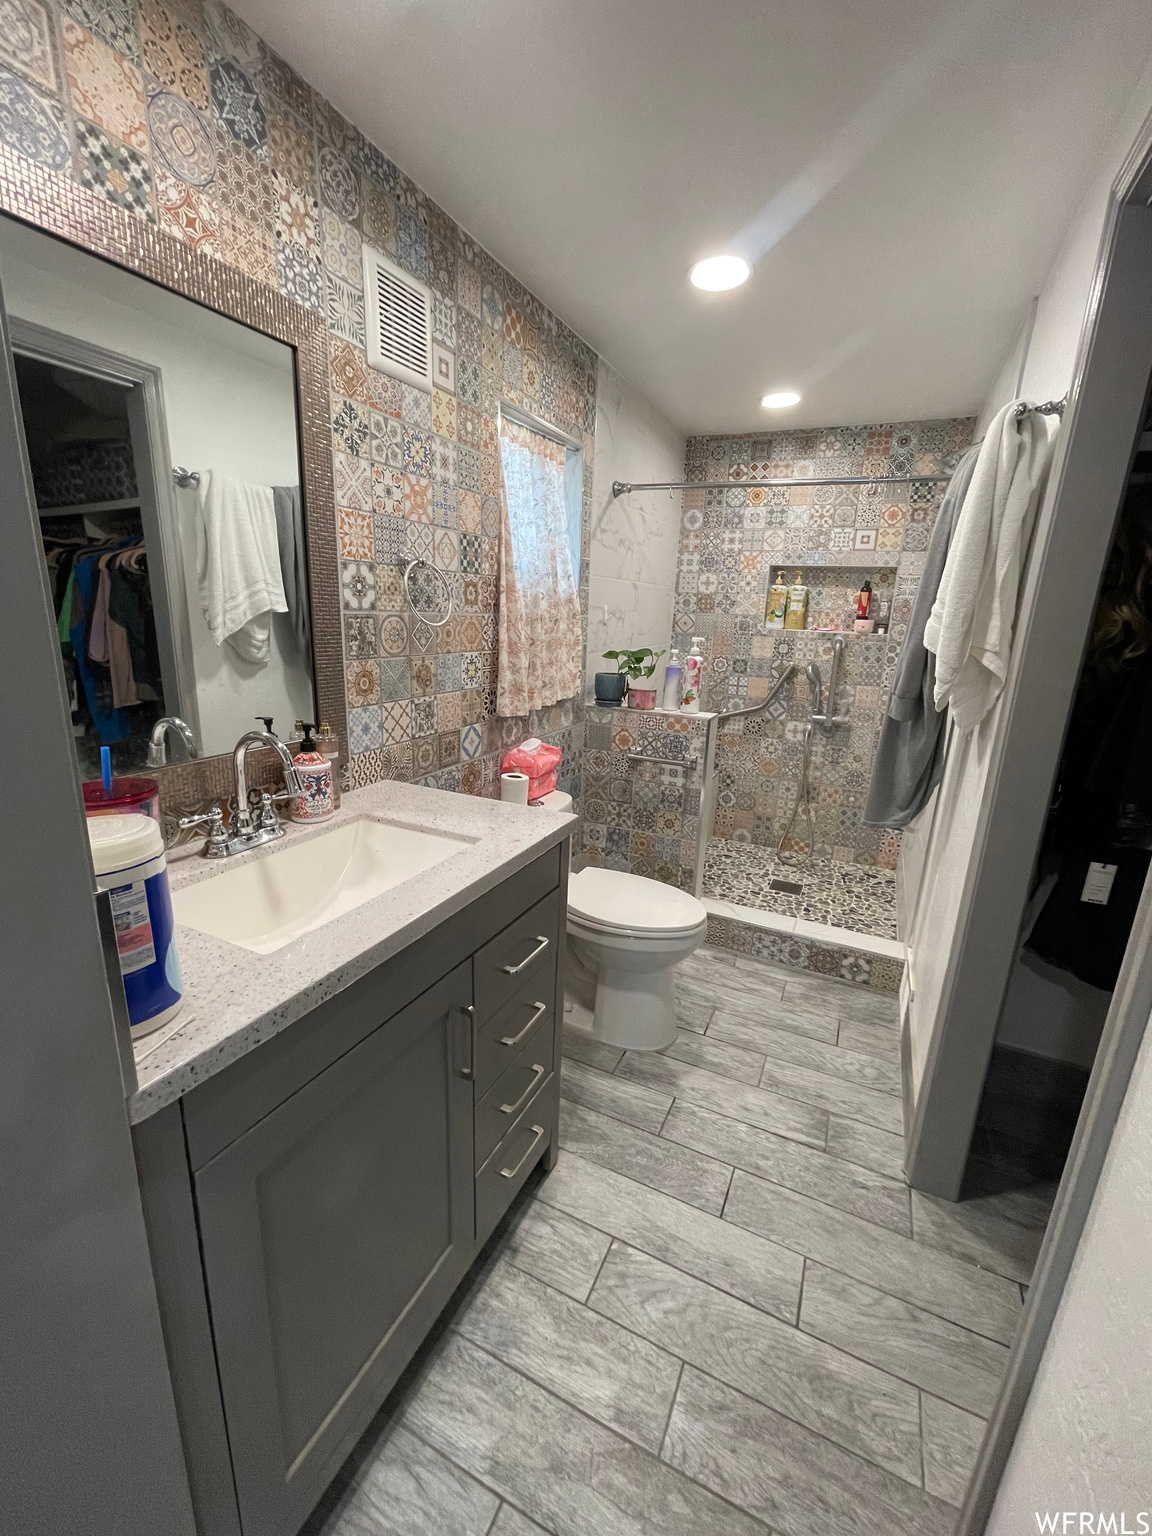 Bathroom with a shower, vanity with extensive cabinet space, and toilet